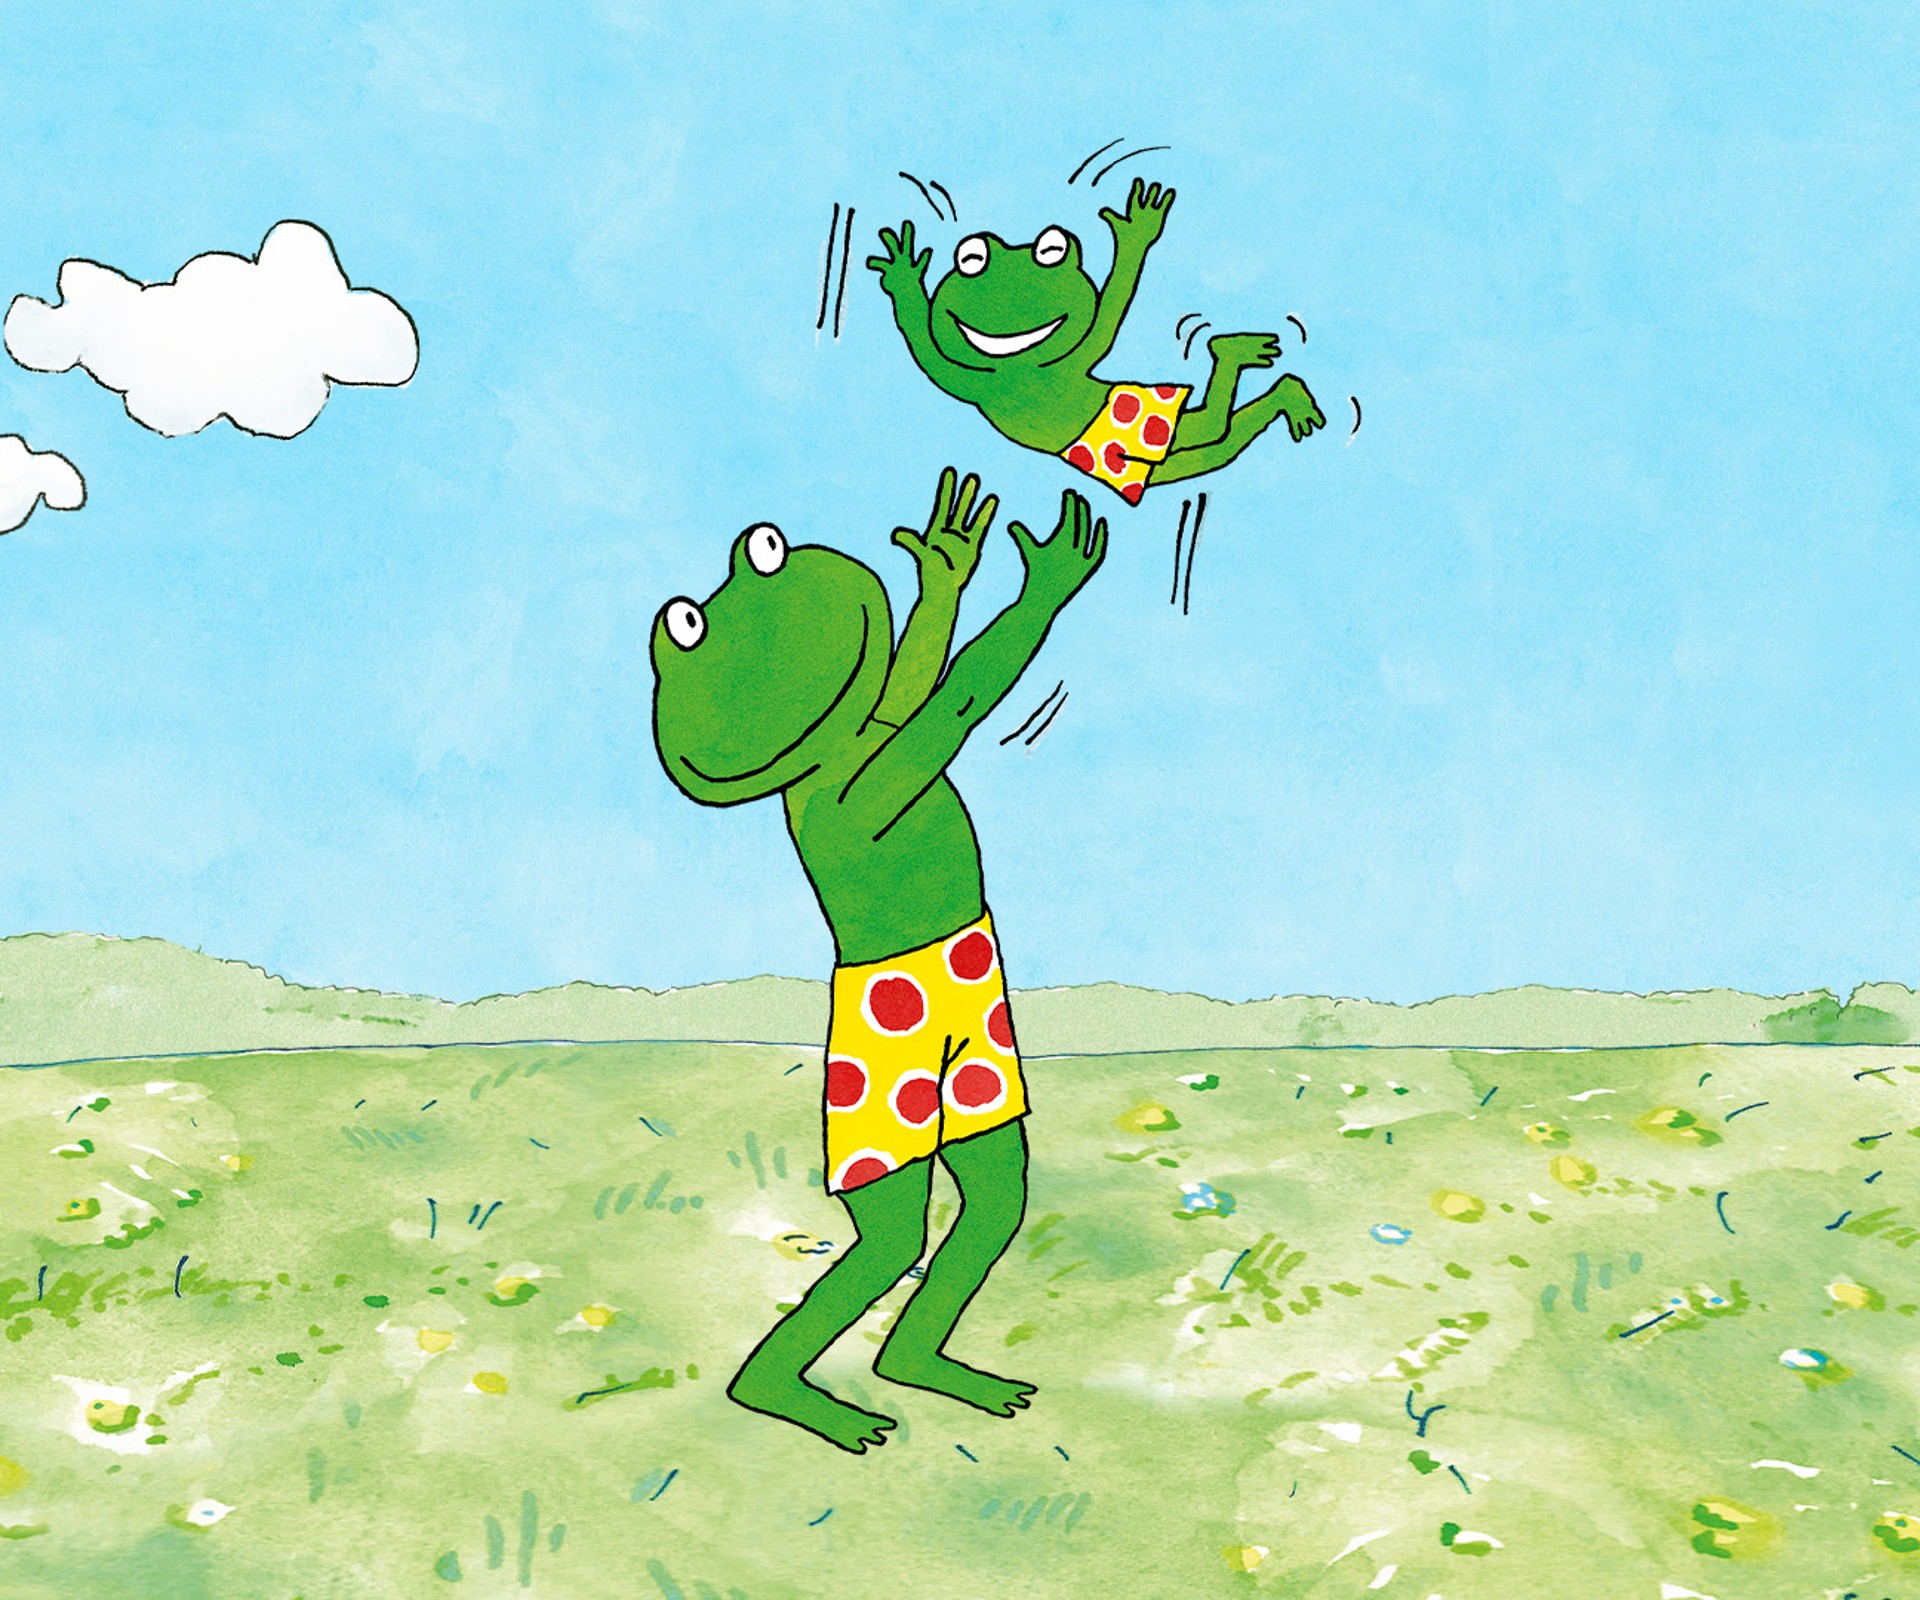 Comicfrog Fred in the grass under the sun